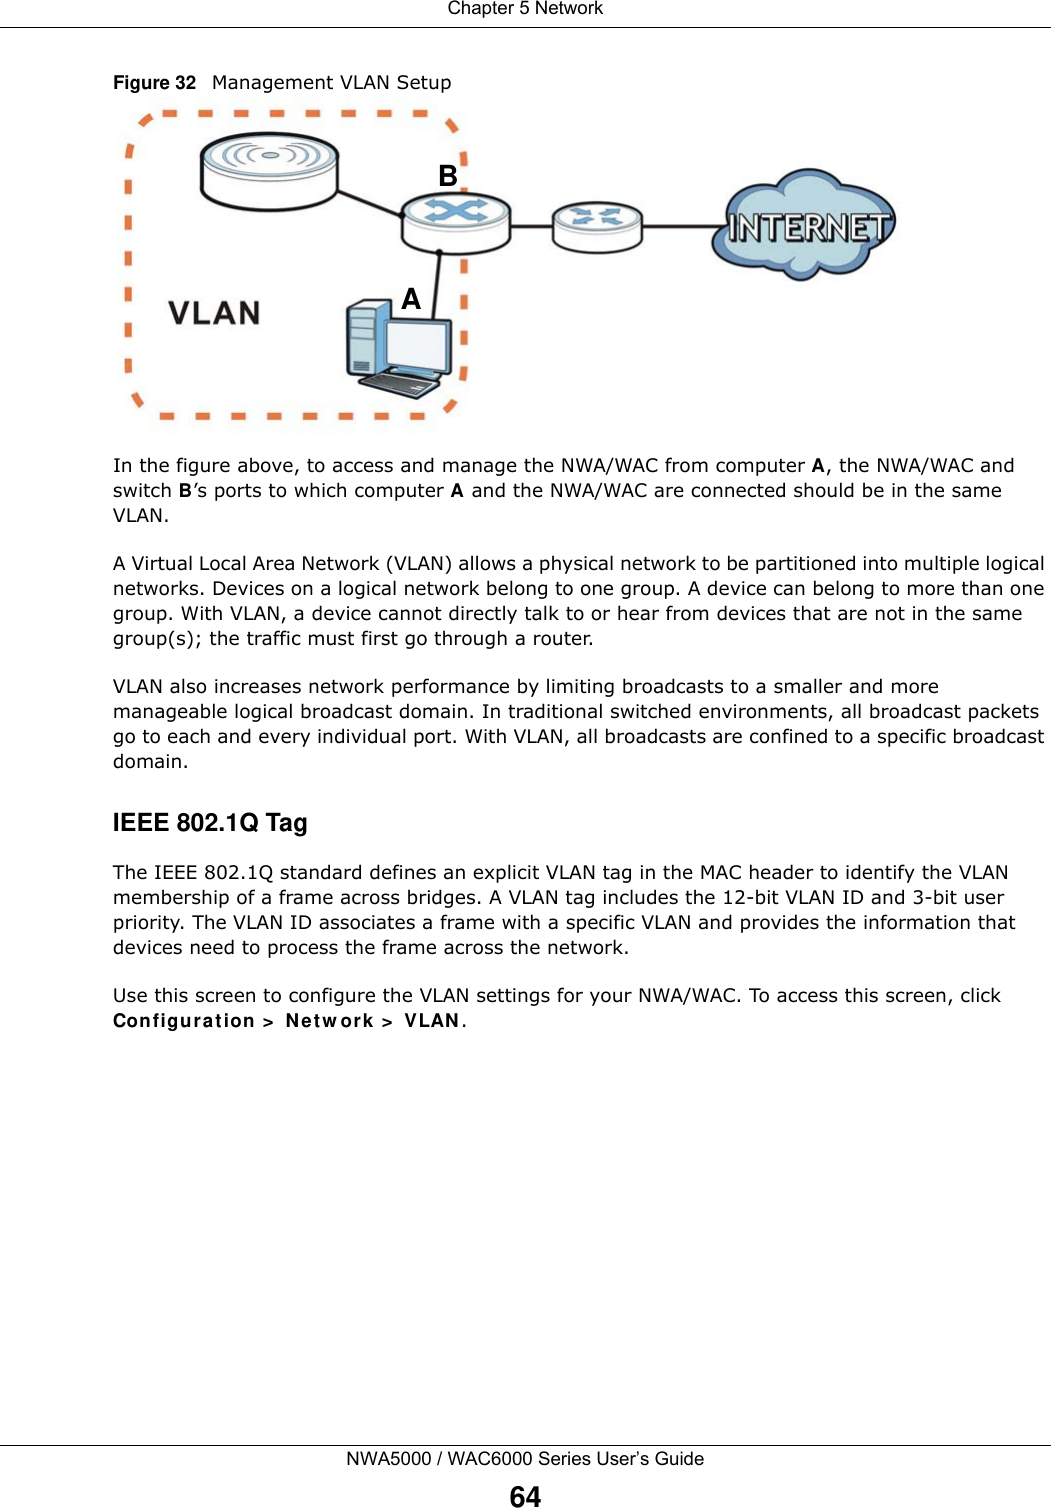 Chapter 5 NetworkNWA5000 / WAC6000 Series User’s Guide64Figure 32   Management VLAN SetupIn the figure above, to access and manage the NWA/WAC from computer A, the NWA/WAC and switch B’s ports to which computer A and the NWA/WAC are connected should be in the same VLAN.A Virtual Local Area Network (VLAN) allows a physical network to be partitioned into multiple logical networks. Devices on a logical network belong to one group. A device can belong to more than one group. With VLAN, a device cannot directly talk to or hear from devices that are not in the same group(s); the traffic must first go through a router.VLAN also increases network performance by limiting broadcasts to a smaller and more manageable logical broadcast domain. In traditional switched environments, all broadcast packets go to each and every individual port. With VLAN, all broadcasts are confined to a specific broadcast domain. IEEE 802.1Q TagThe IEEE 802.1Q standard defines an explicit VLAN tag in the MAC header to identify the VLAN membership of a frame across bridges. A VLAN tag includes the 12-bit VLAN ID and 3-bit user priority. The VLAN ID associates a frame with a specific VLAN and provides the information that devices need to process the frame across the network. Use this screen to configure the VLAN settings for your NWA/WAC. To access this screen, click Configur at ion &gt;  N et w ork  &gt;  VLAN .AB